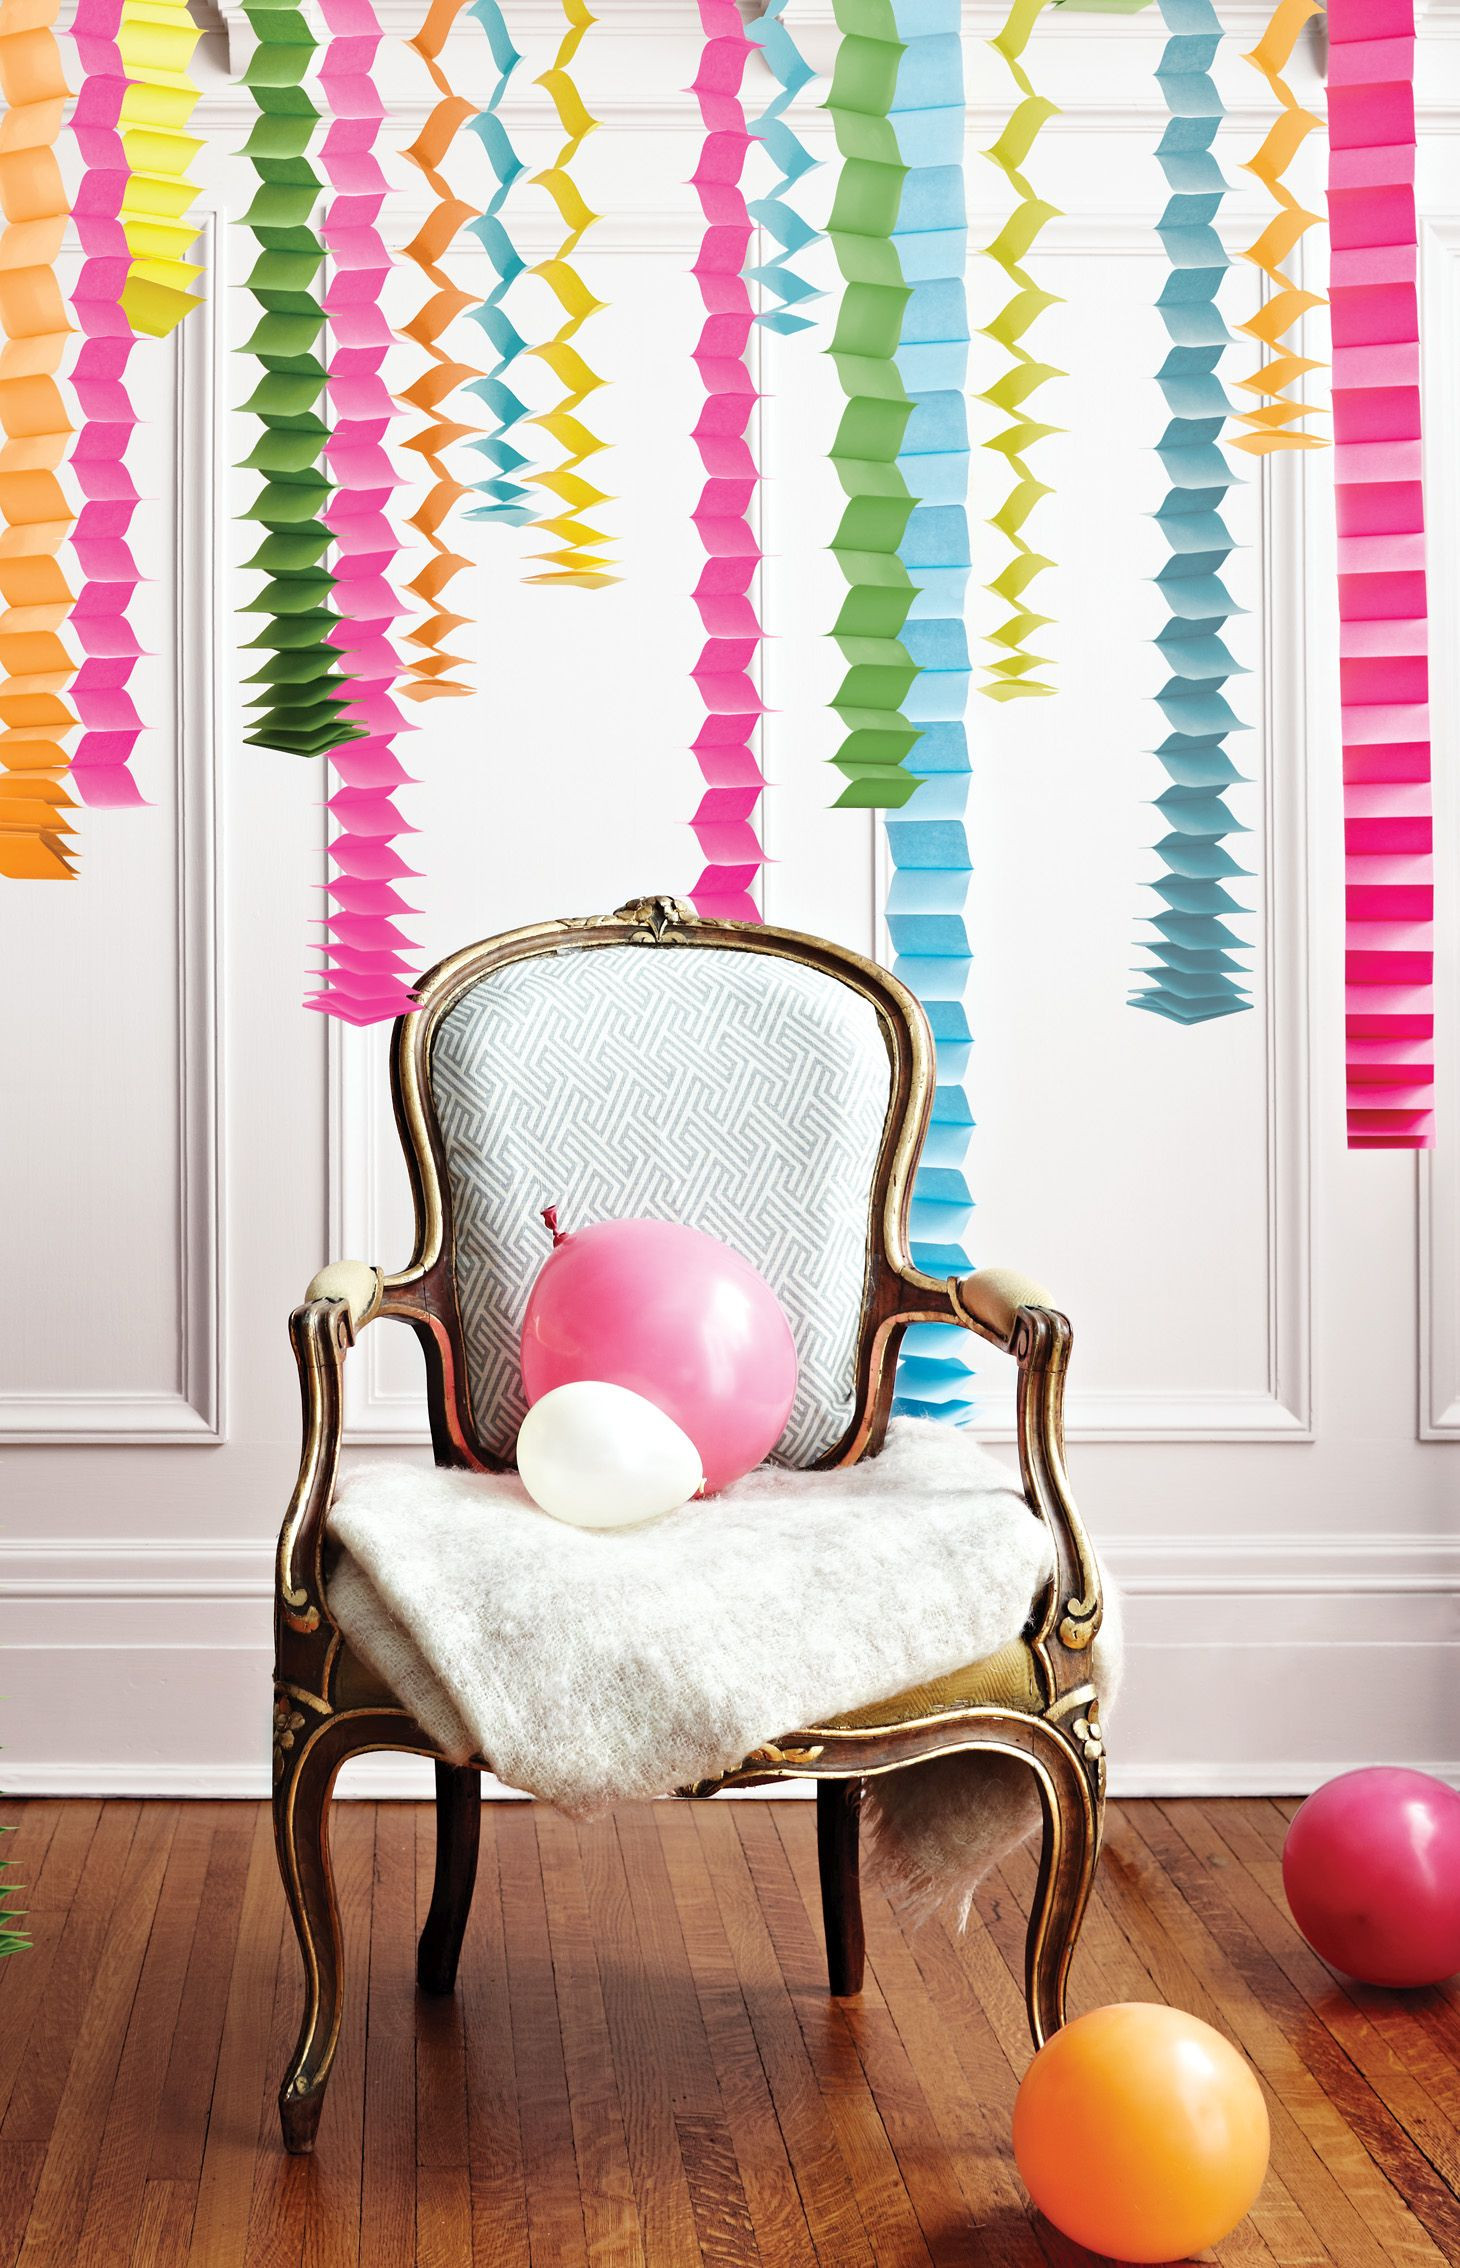 Streamer Decoration Ideas For Birthday Party
 Creating A Housewarming Party With DIY Decorations